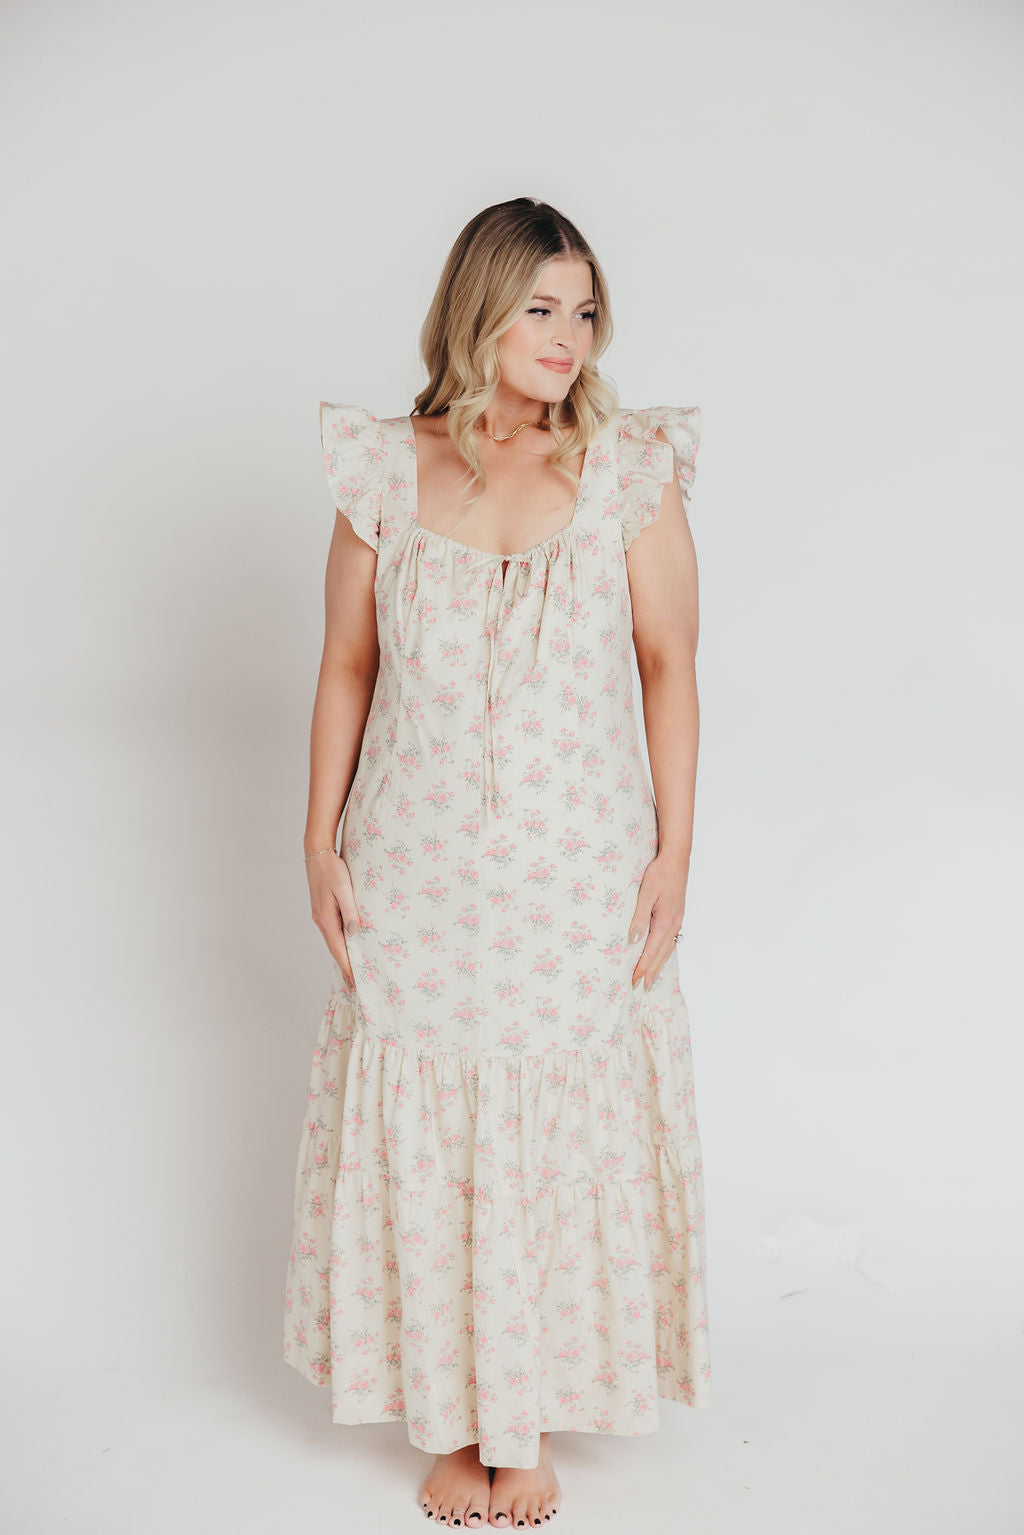 Emery Midi Dress in Pink and Cream (Sizes S-XL)